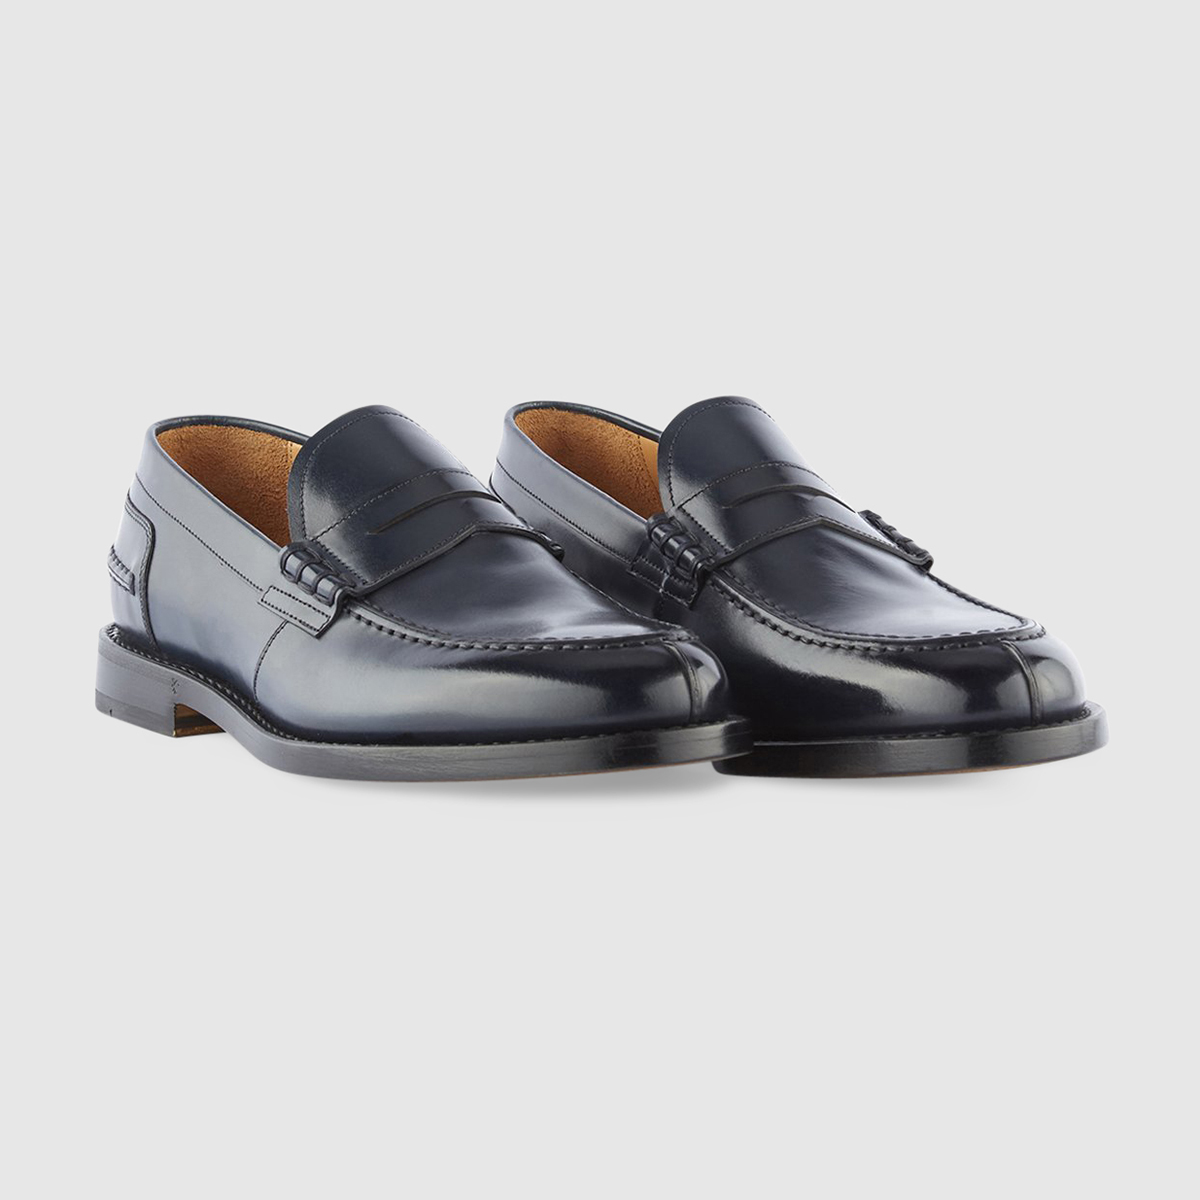 College Loafers in Dark Blue Brushed Calfskin Leather Gruppo Fabi on sale 2022 2